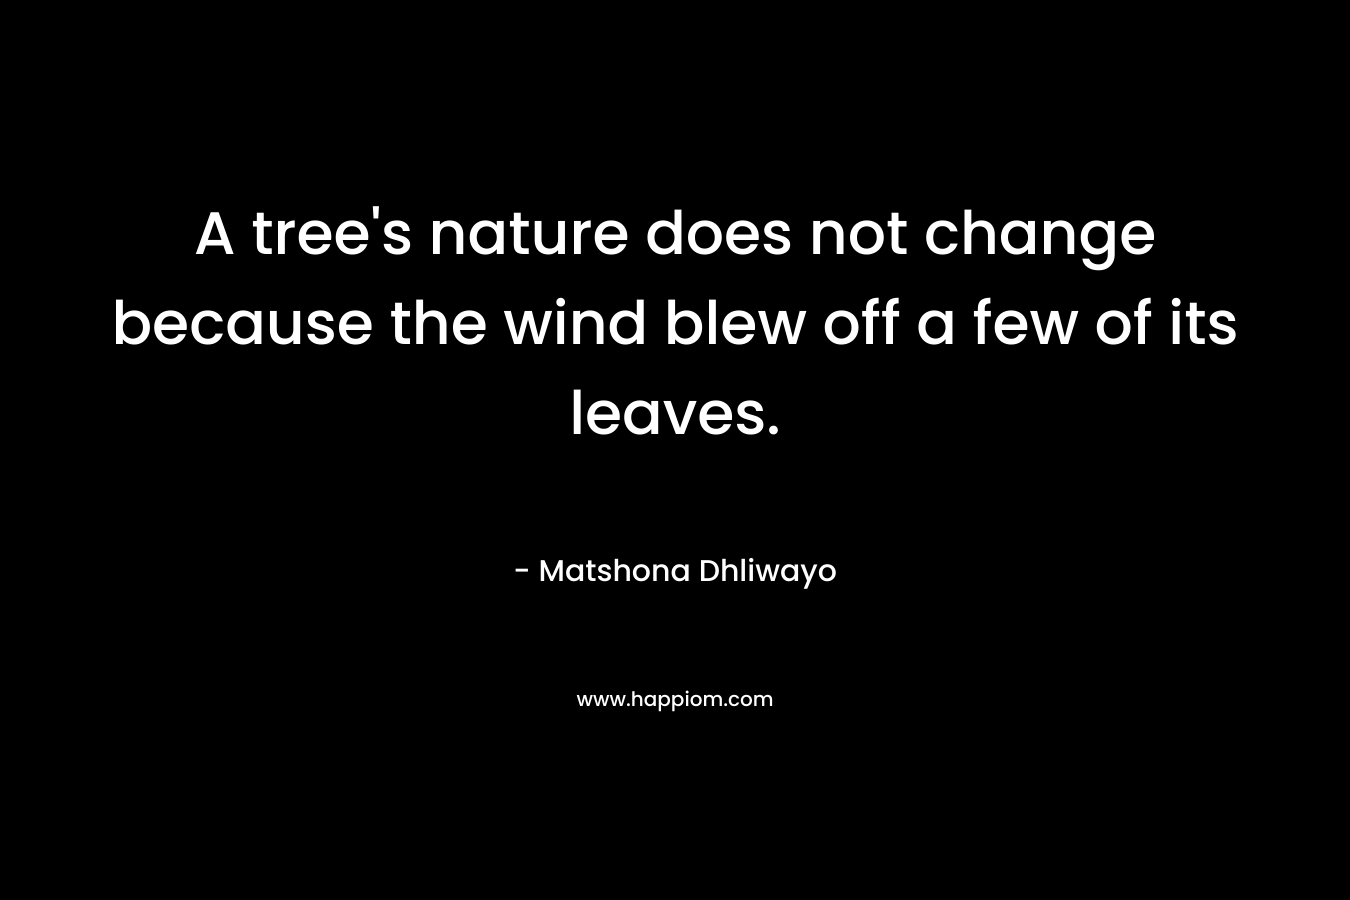 A tree's nature does not change because the wind blew off a few of its leaves.